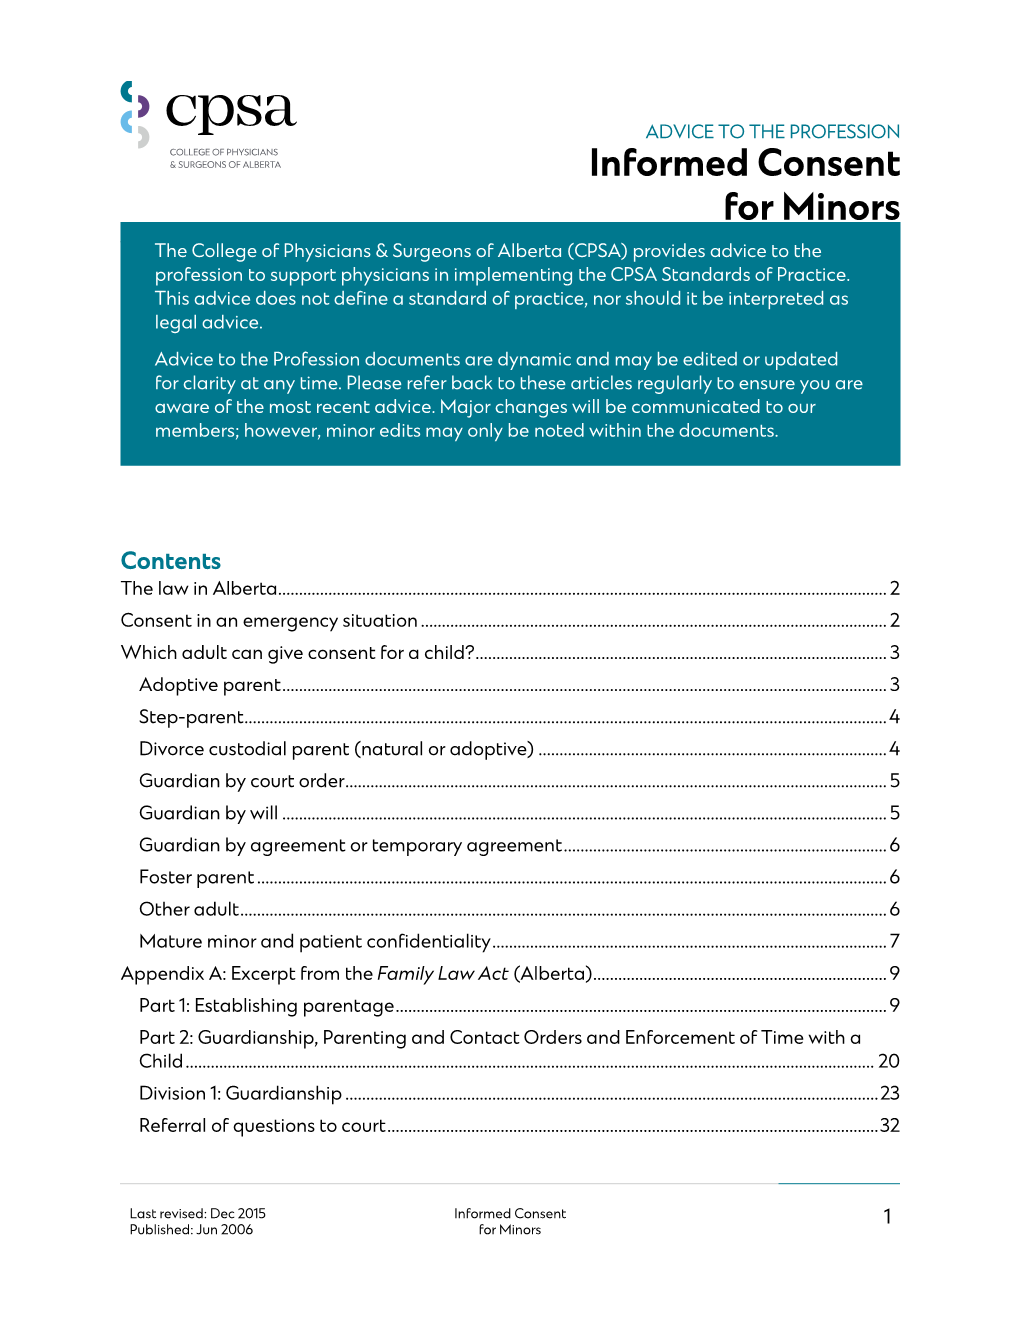 Informed Consent for Minors the College of Physicians & Surgeons of Alberta (CPSA) Provides Advice to The